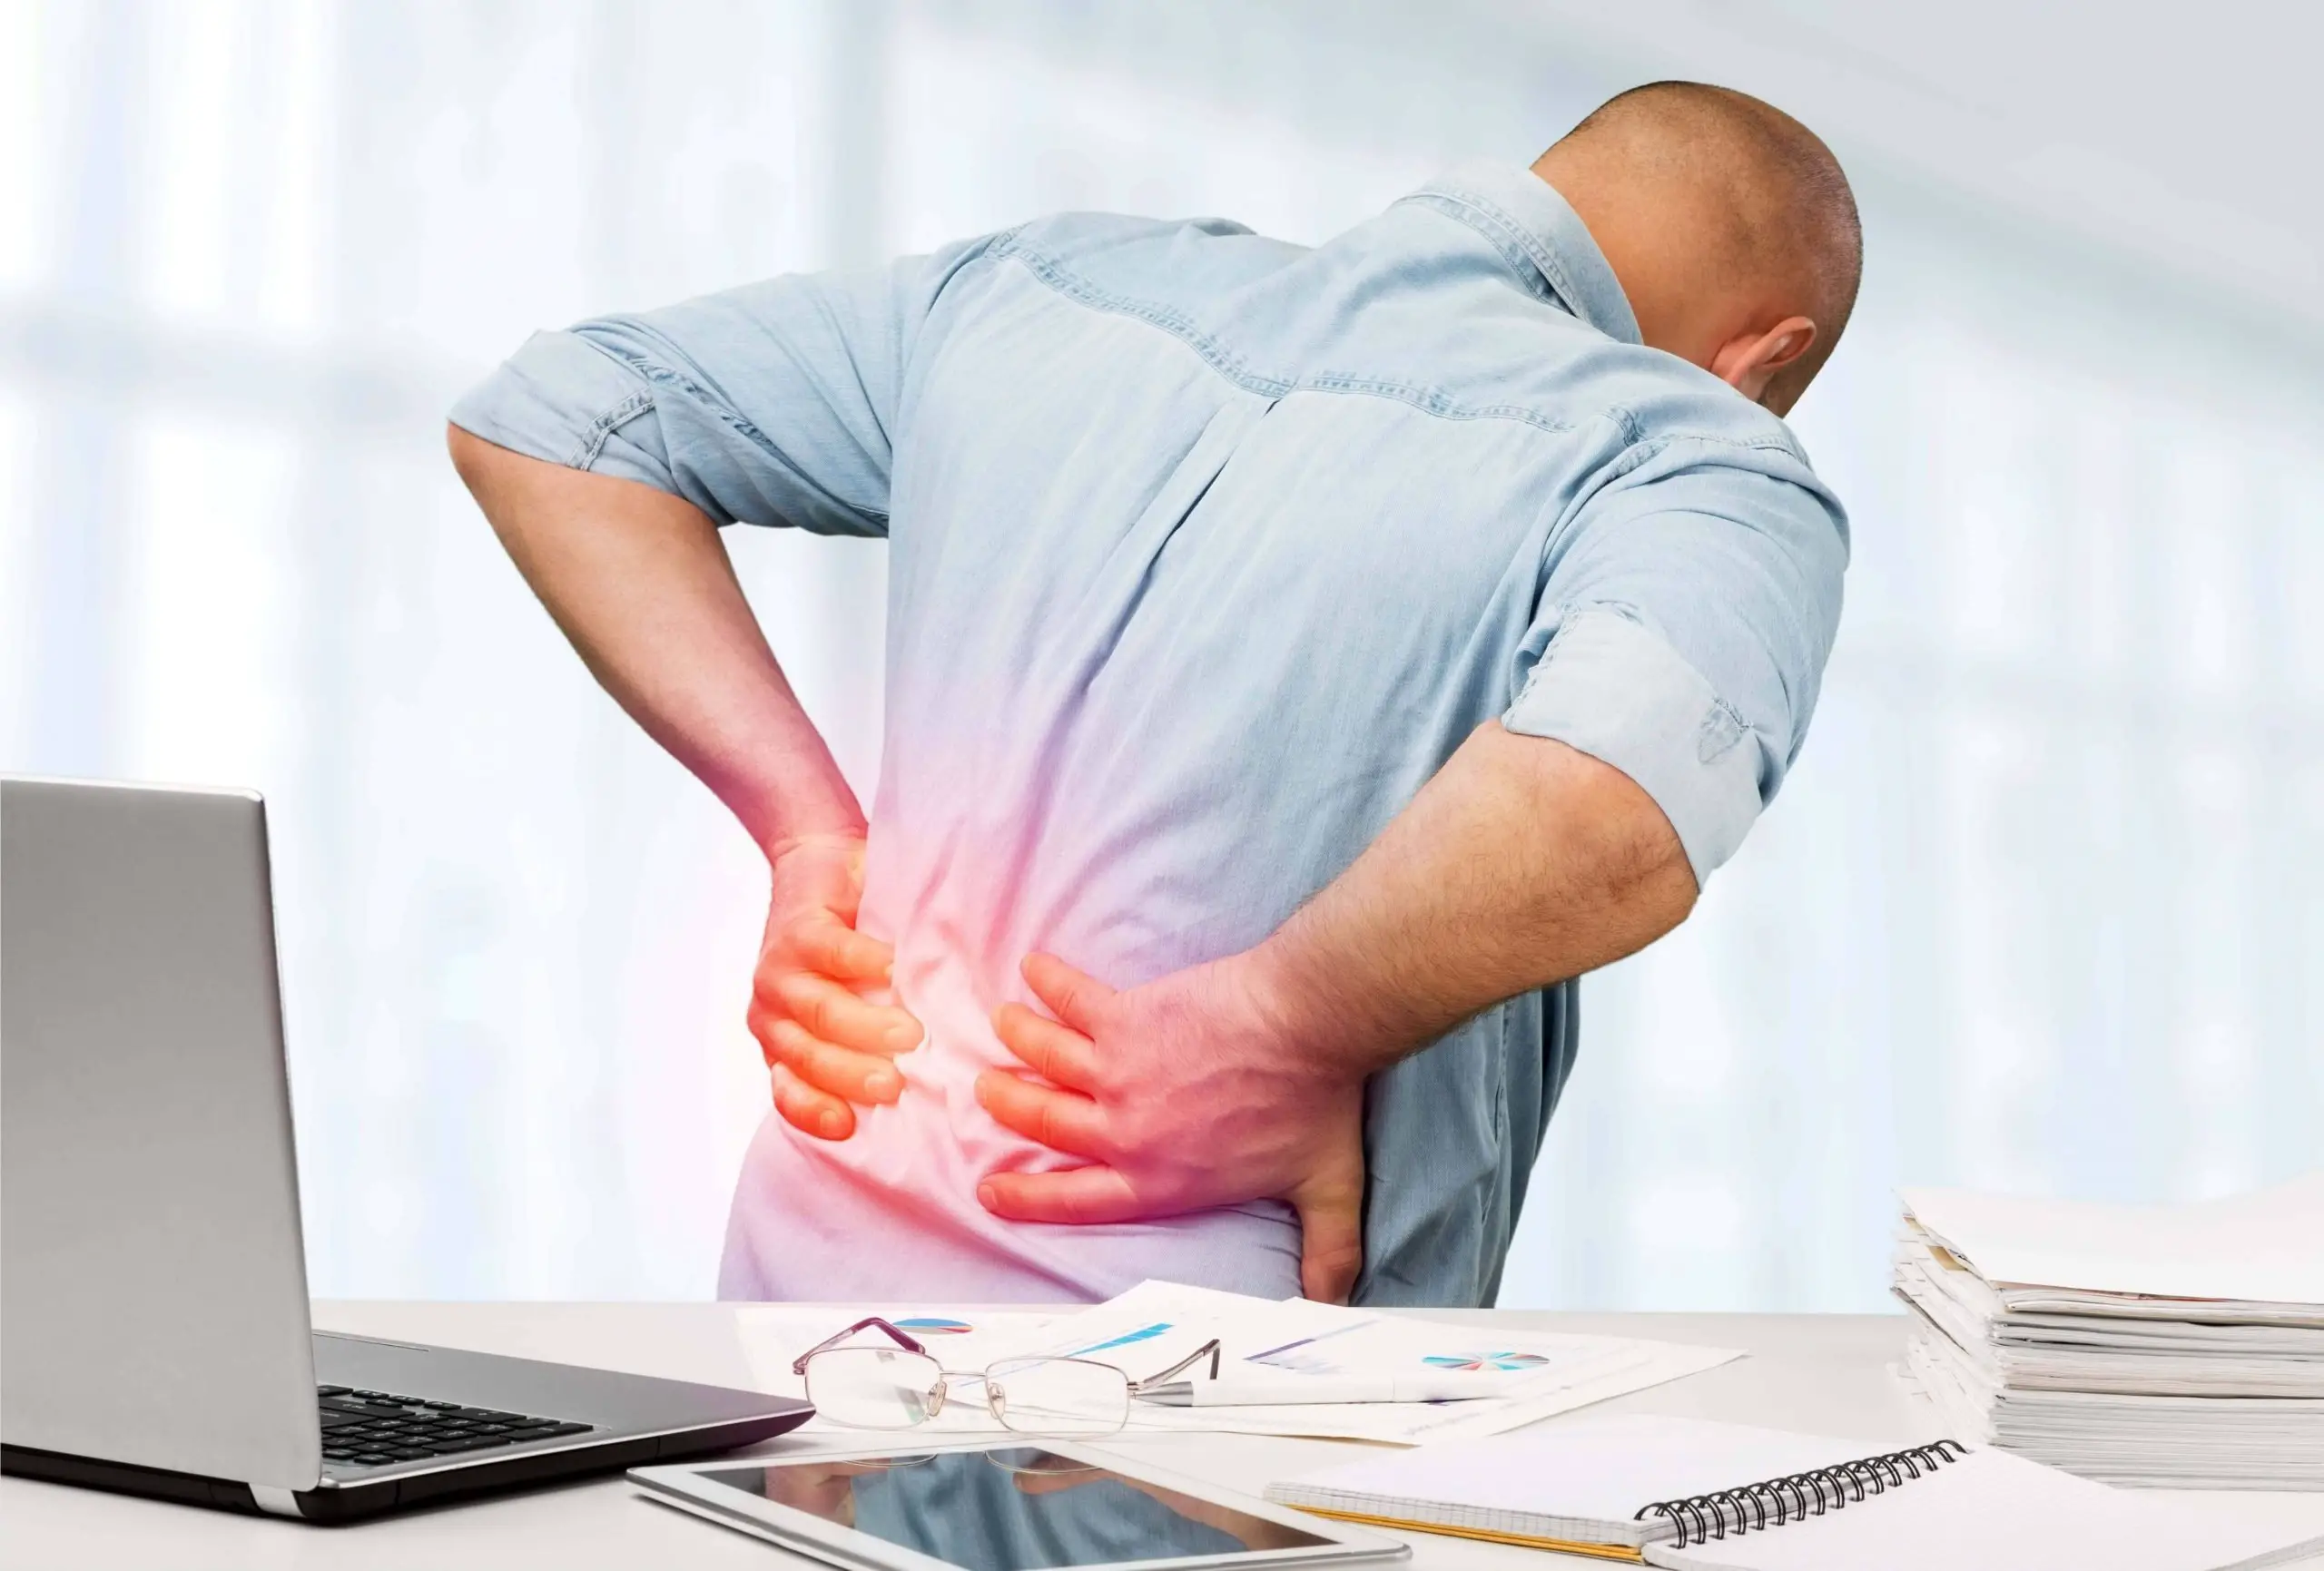 What do you think is causing your back pain?